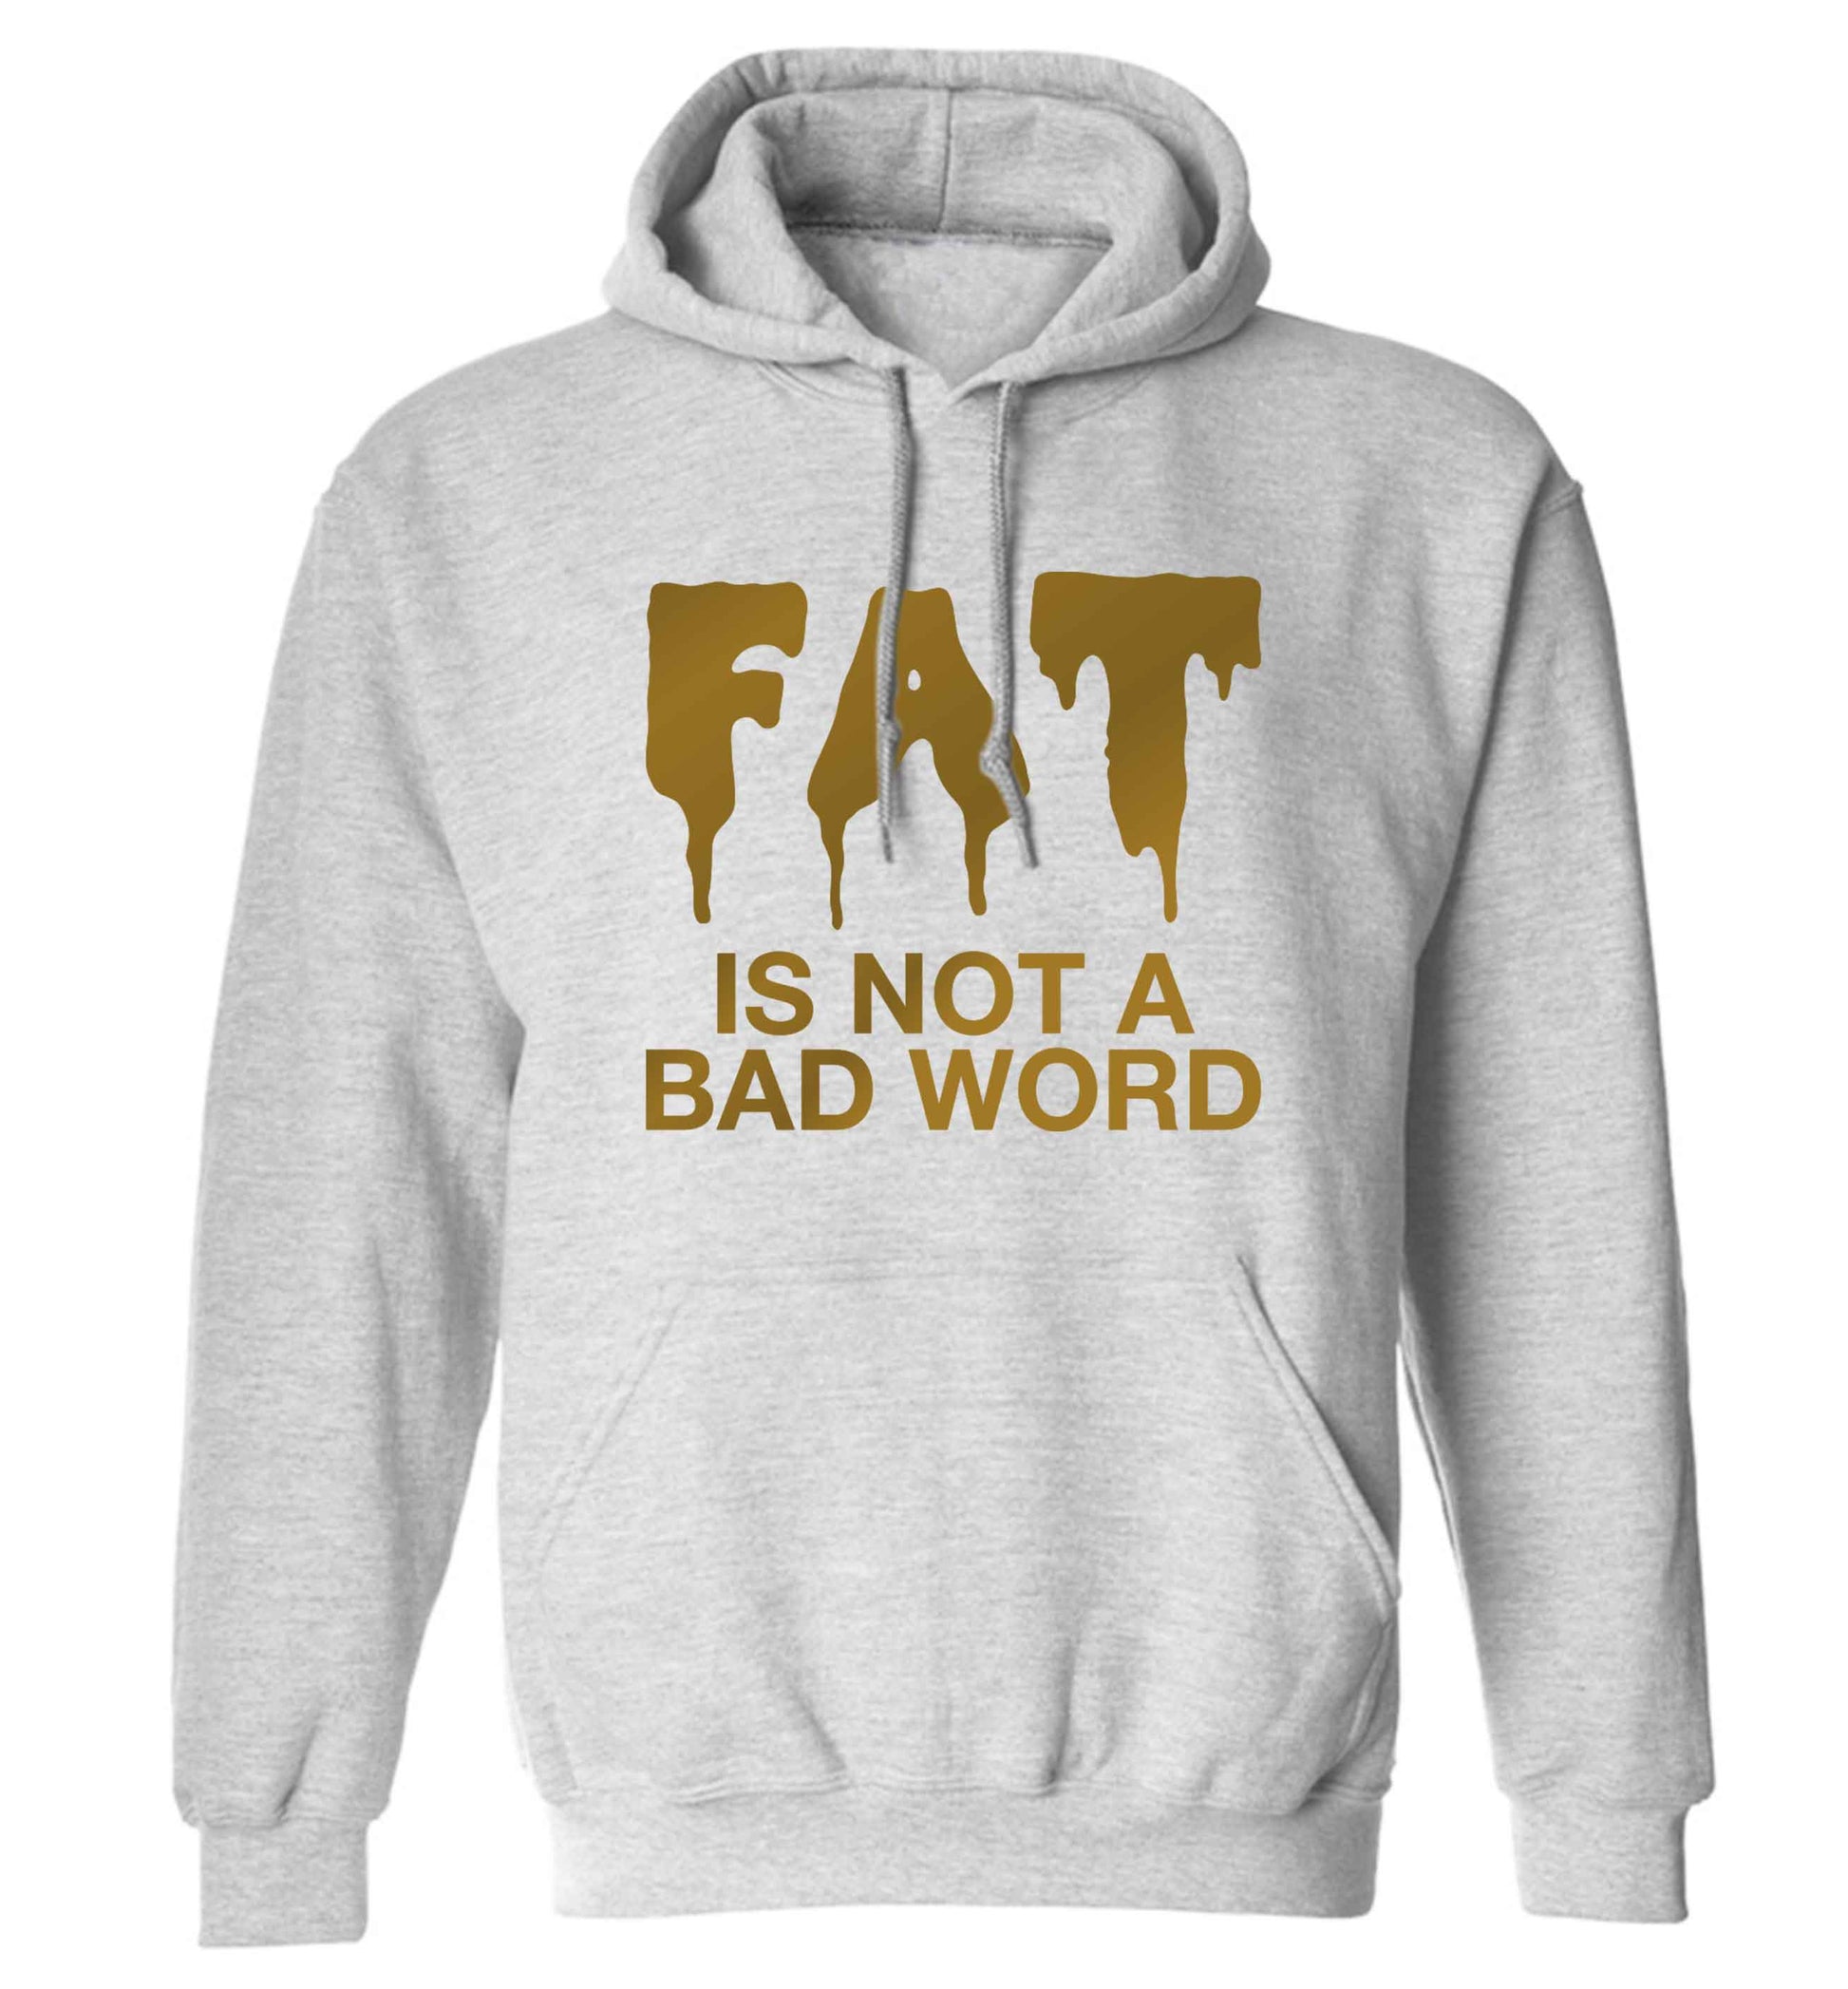 Fat is not a bad word adults unisex grey hoodie 2XL